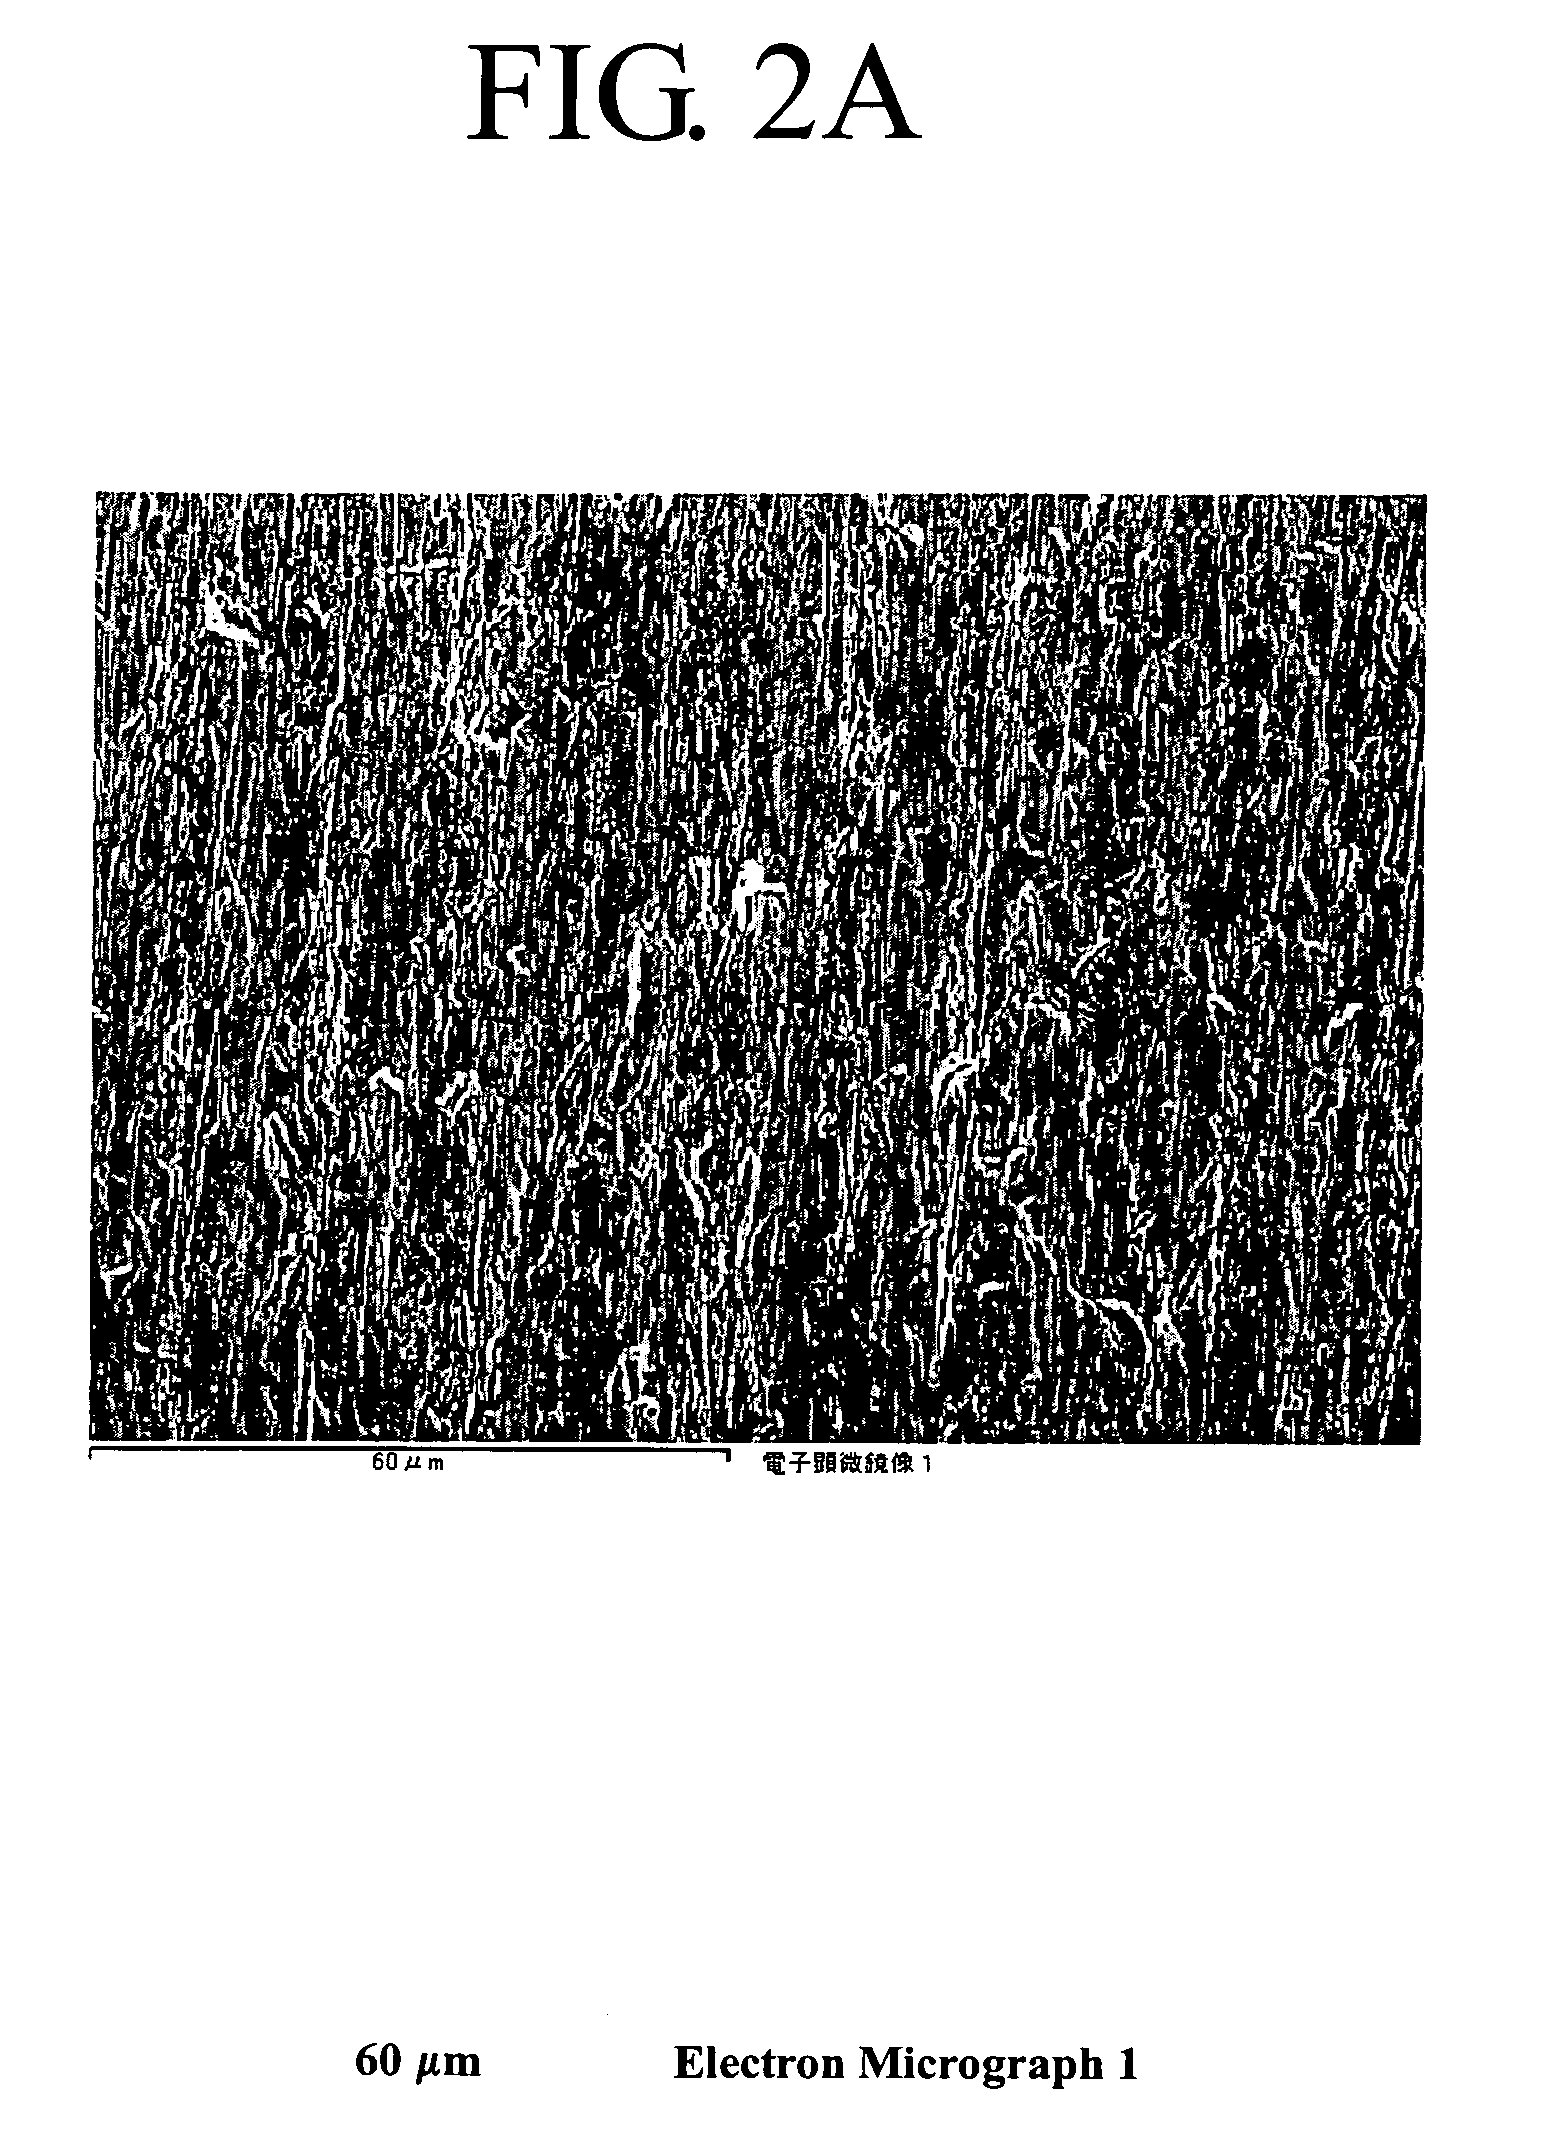 Substrate treatment method for portion to be coated